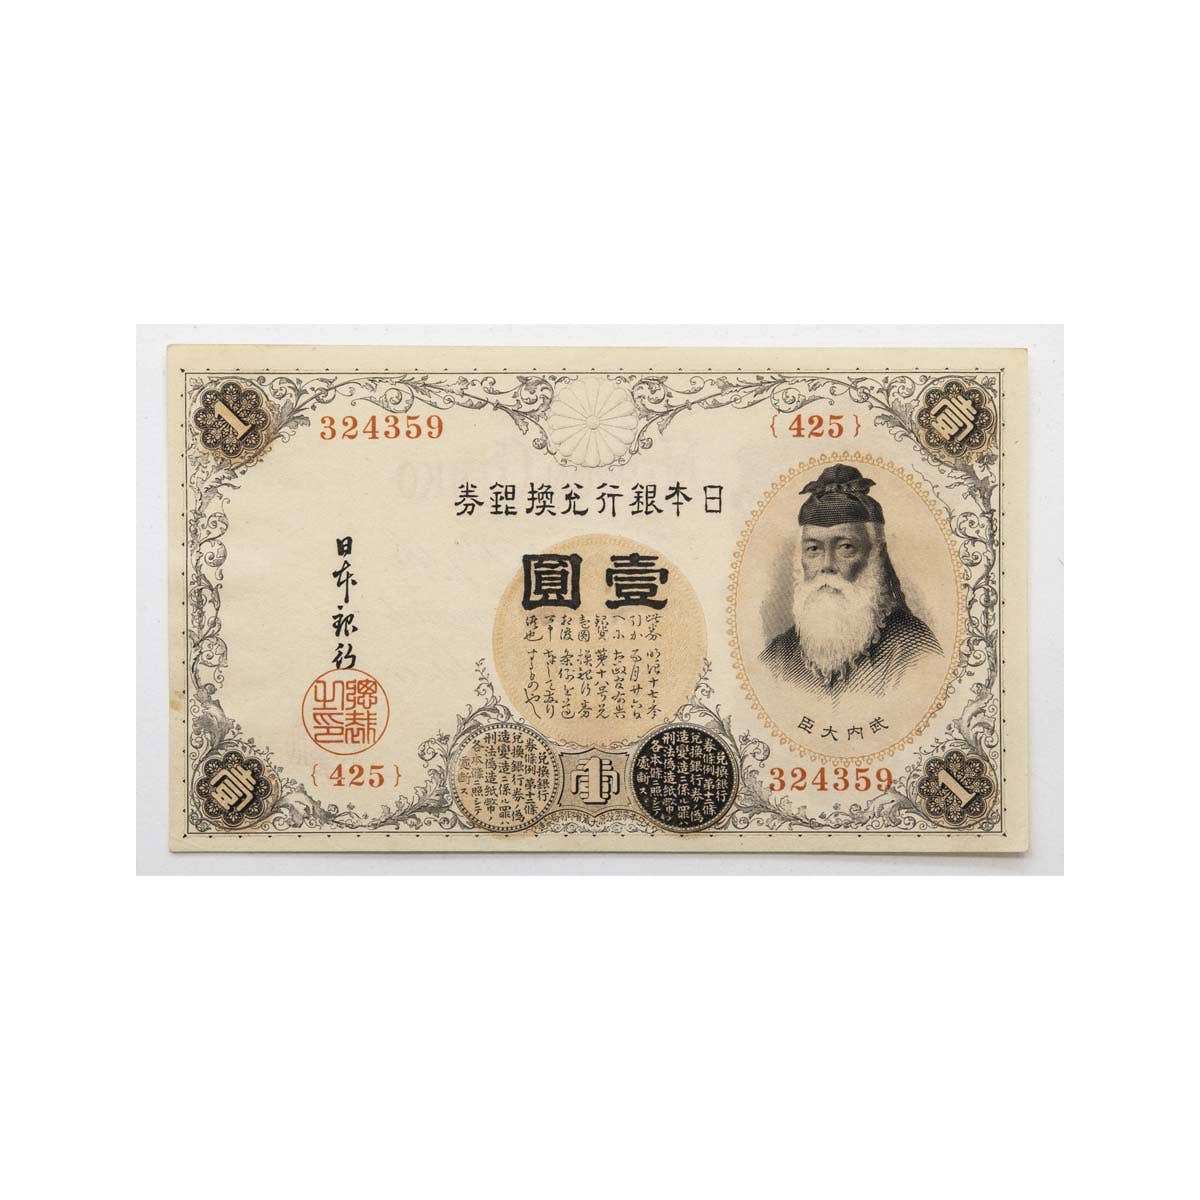 Japan No Date (1916) 1 Yen Silver Certificate Banknote about Uncirculated-Uncirculated